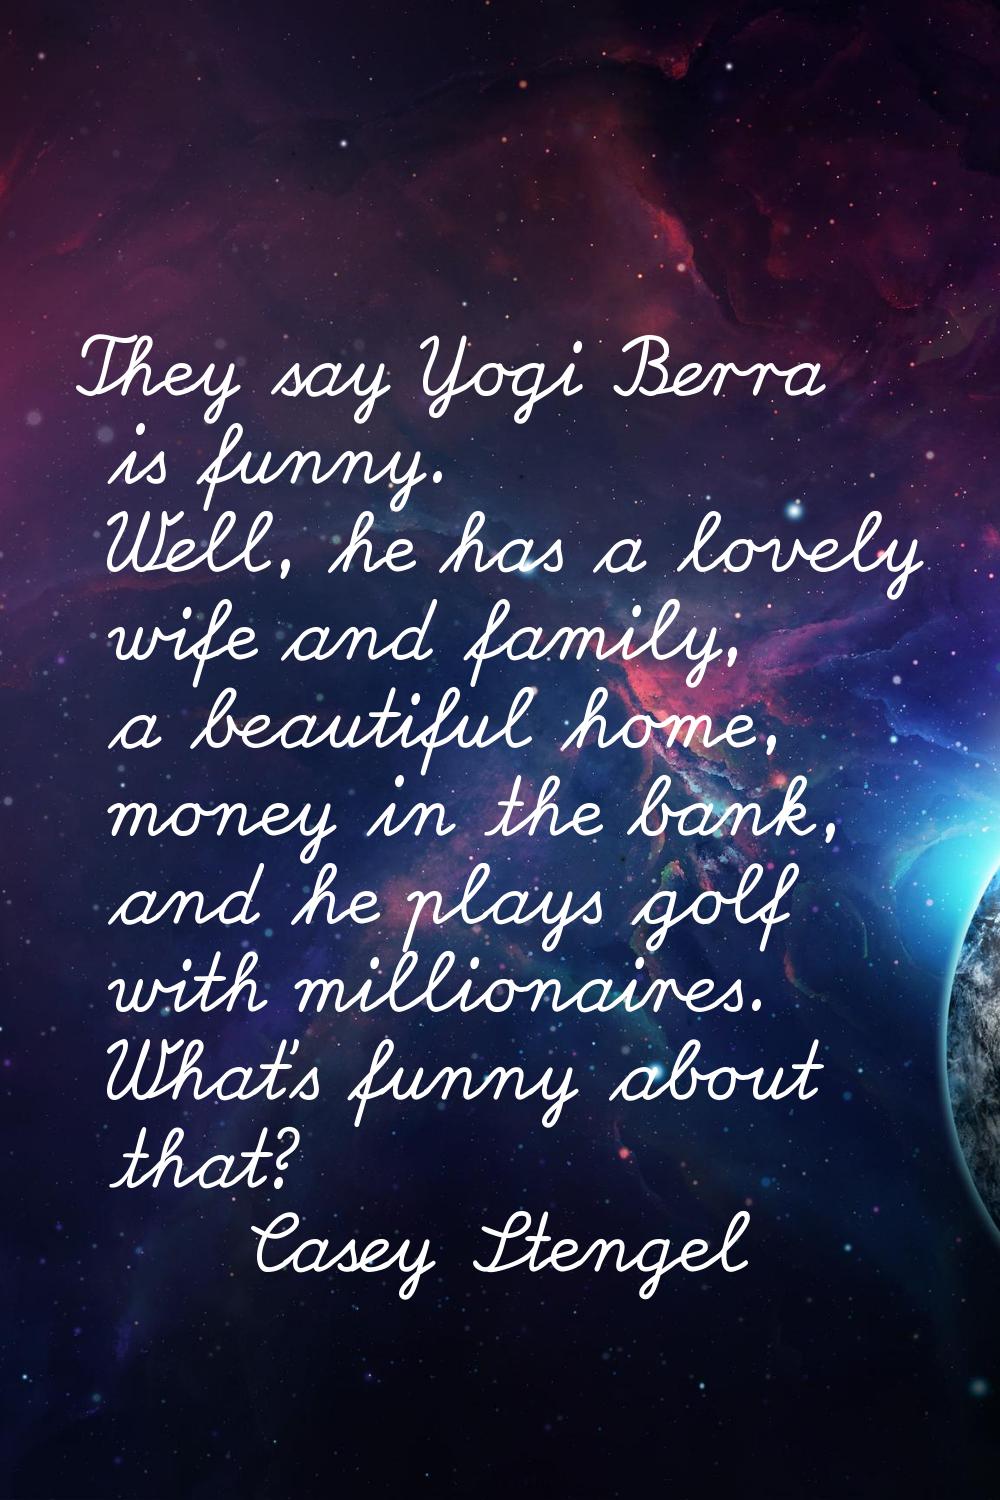 They say Yogi Berra is funny. Well, he has a lovely wife and family, a beautiful home, money in the